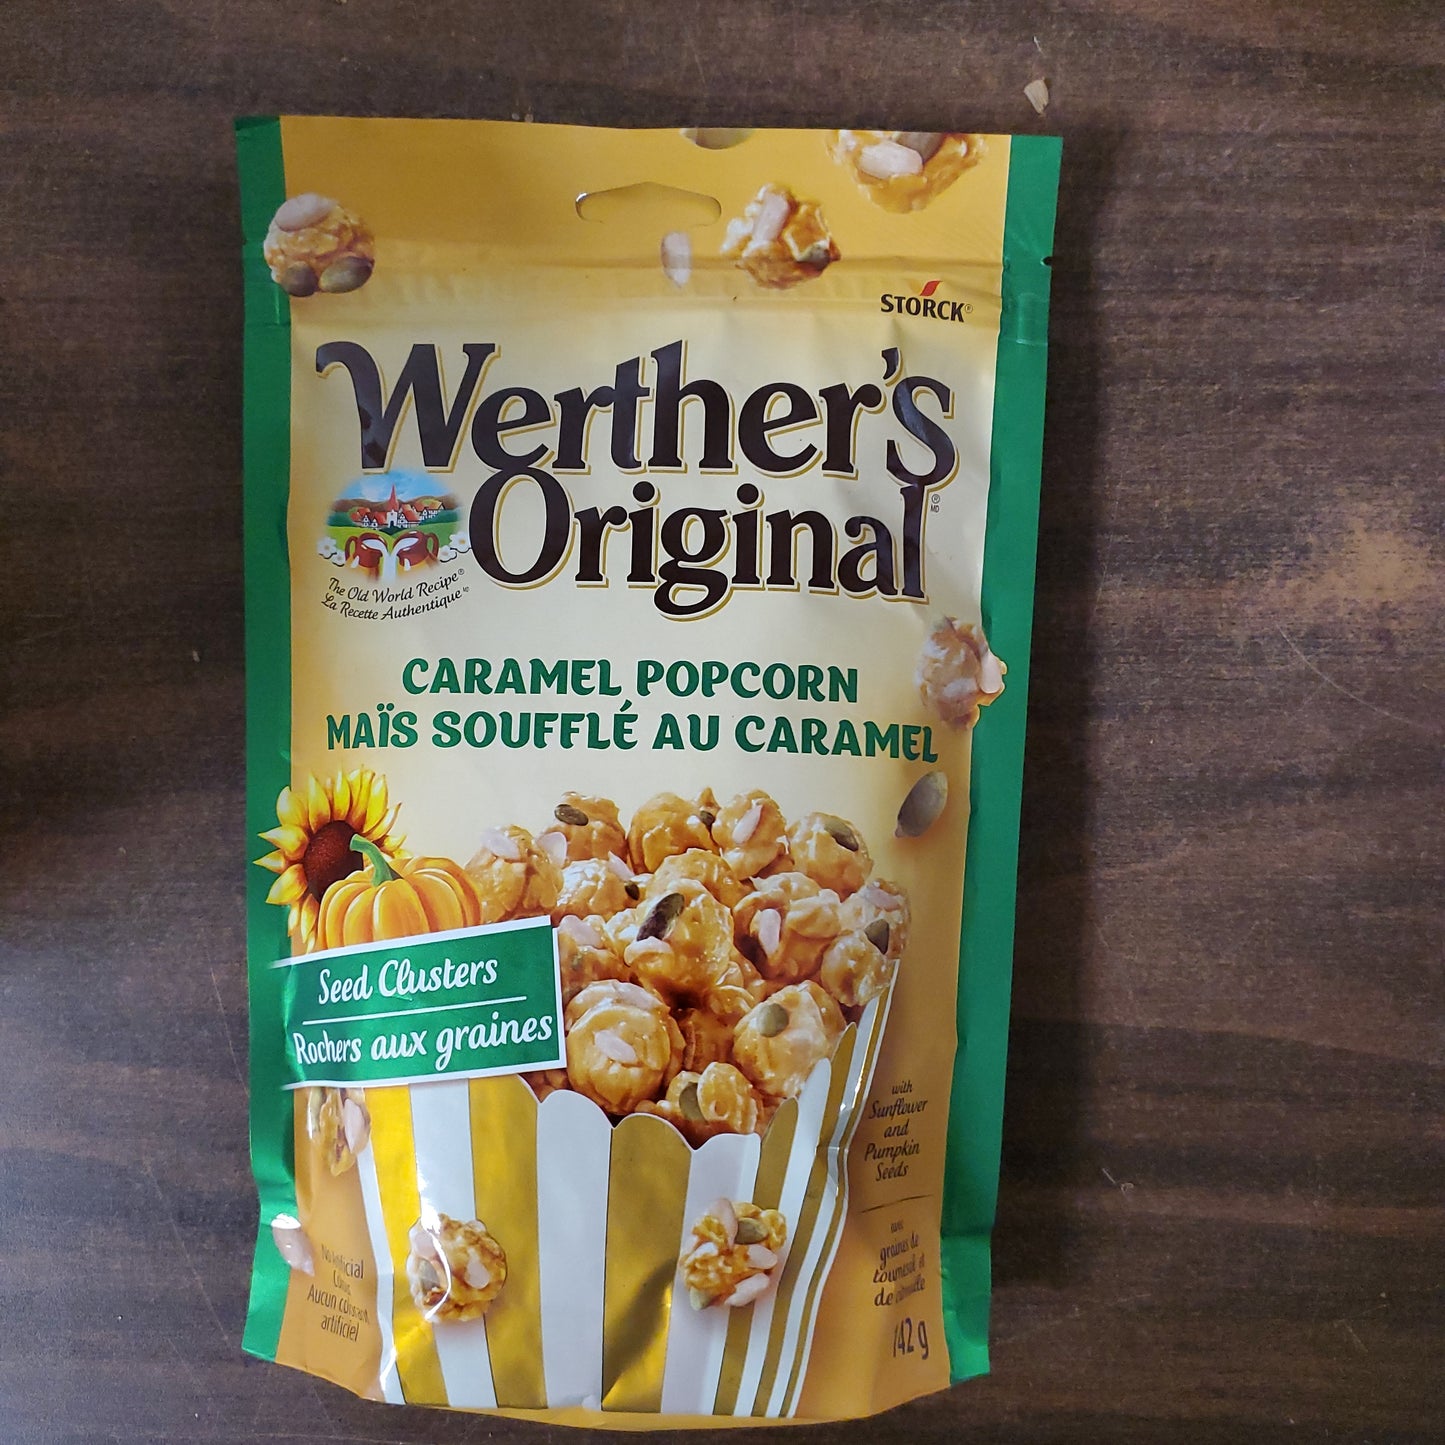 Werther's Original Caramel Popcorn Seed Clusters